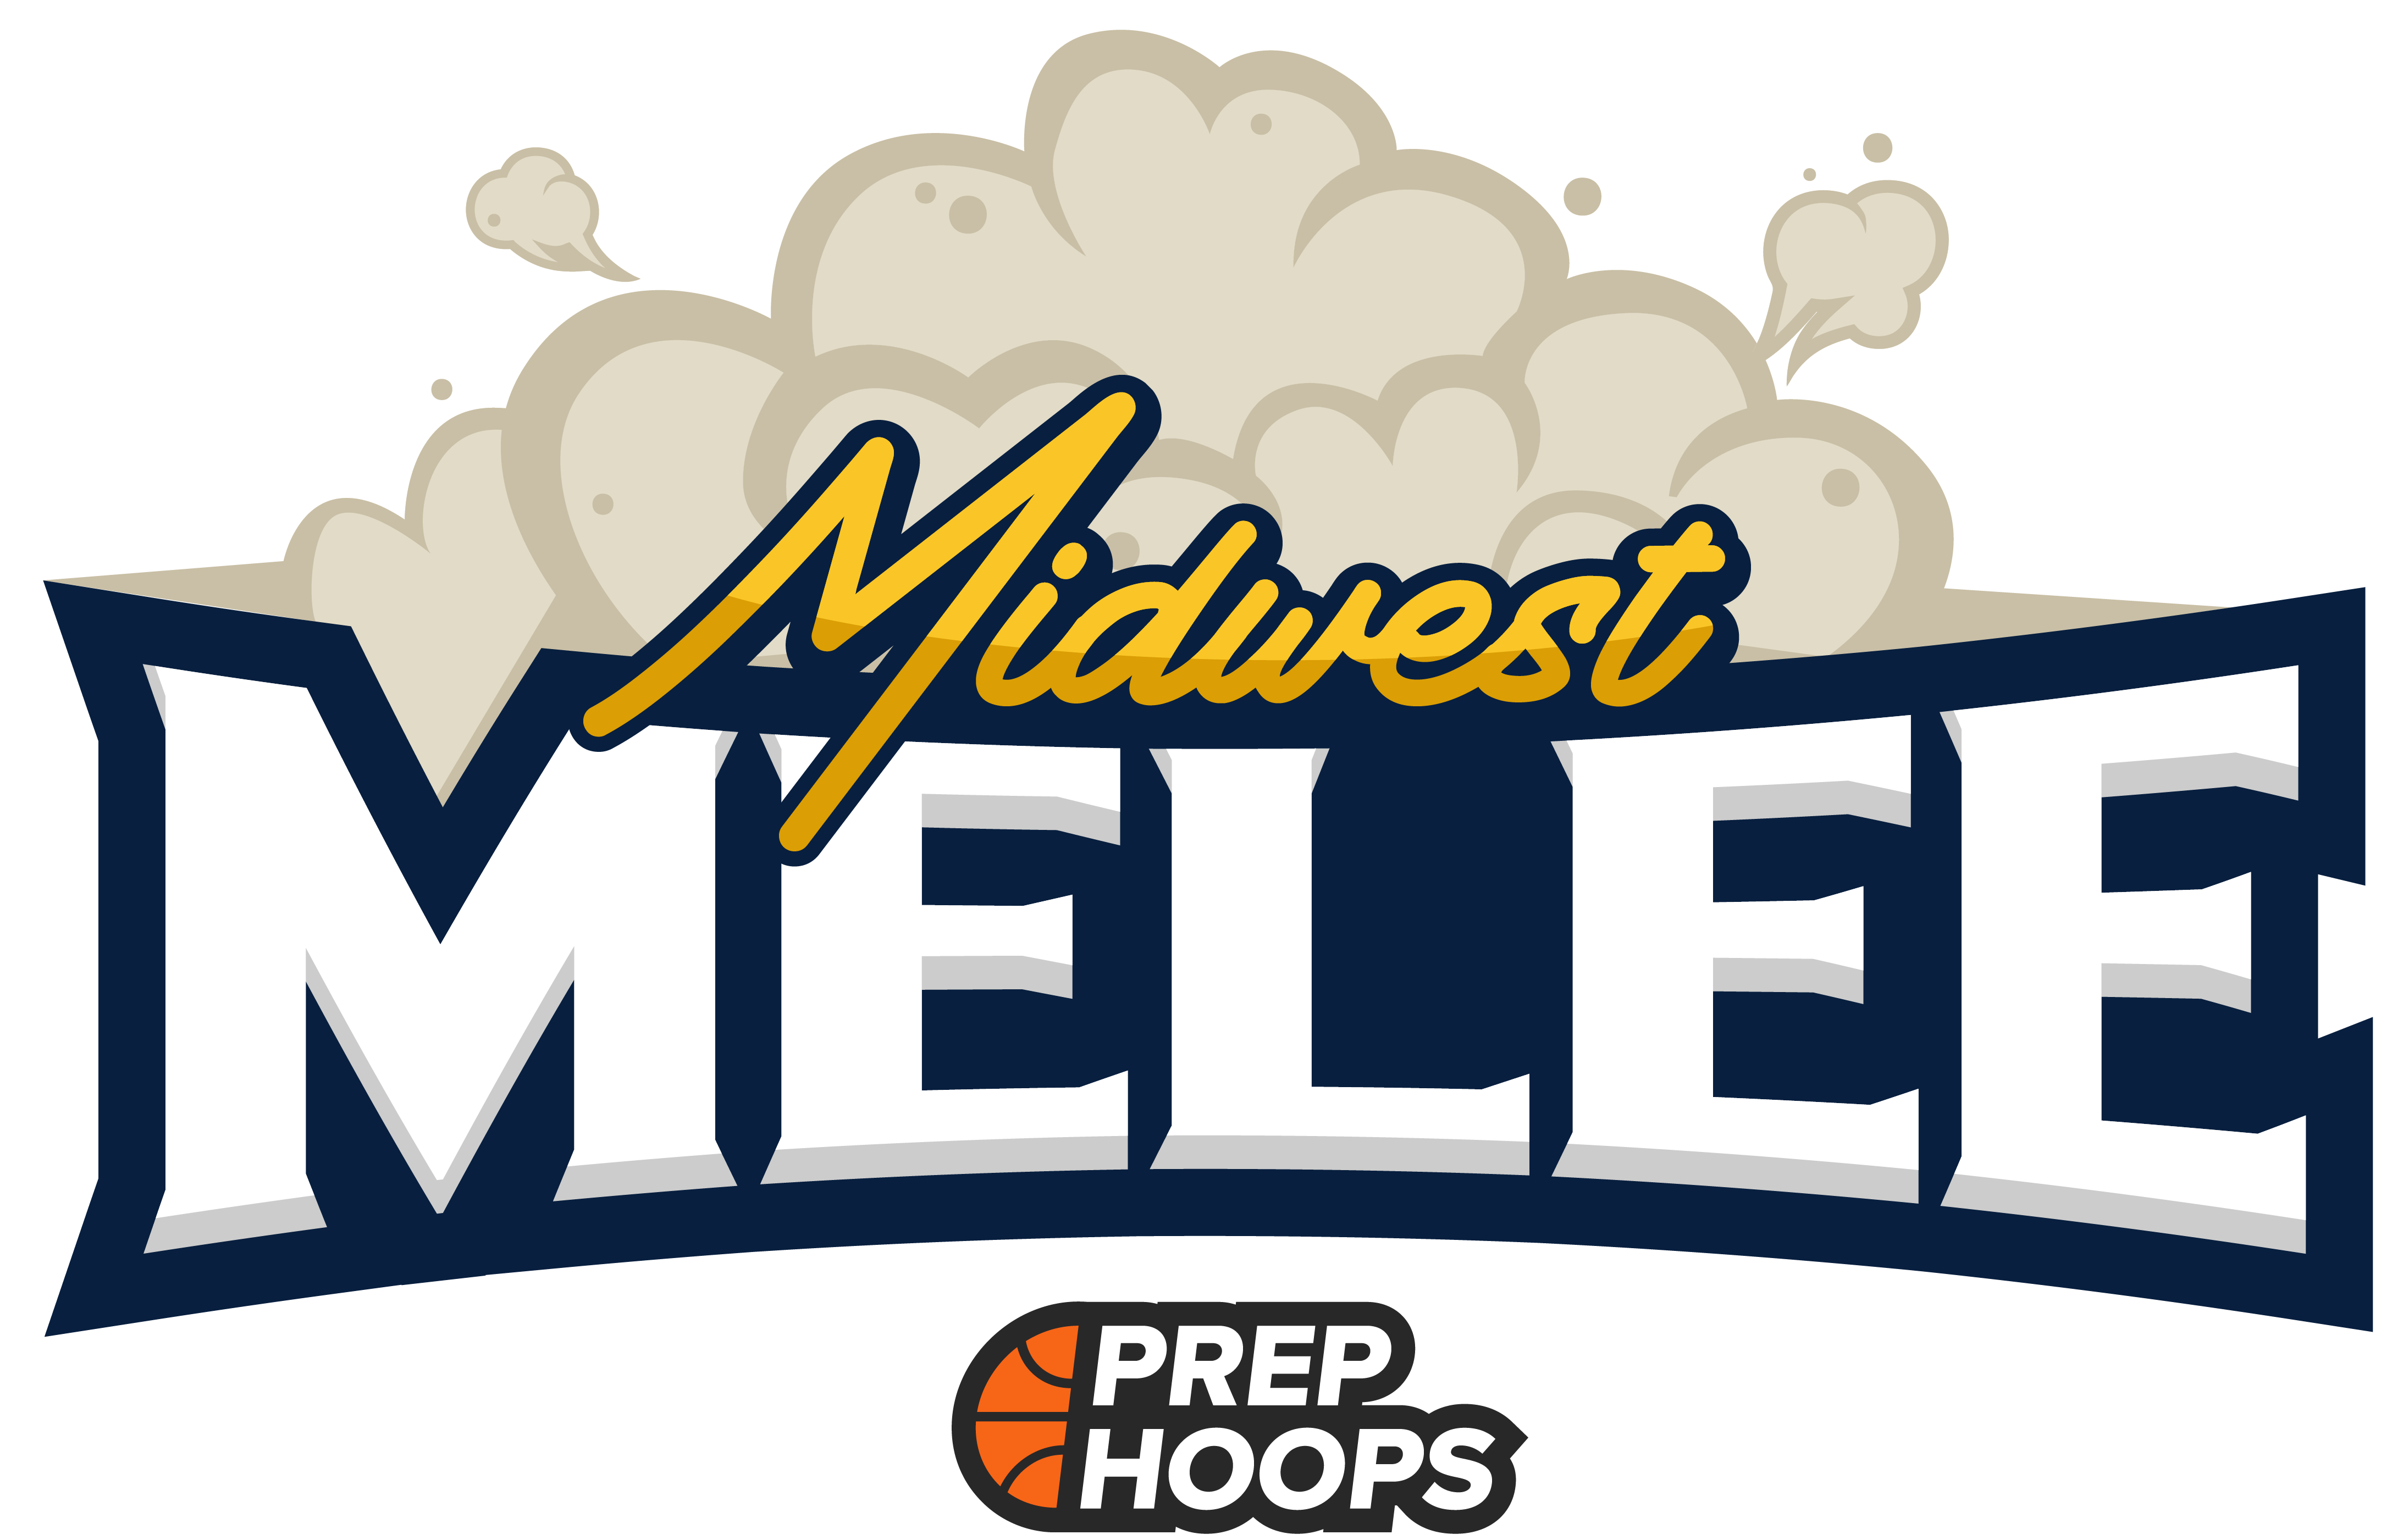 Midwest Melee